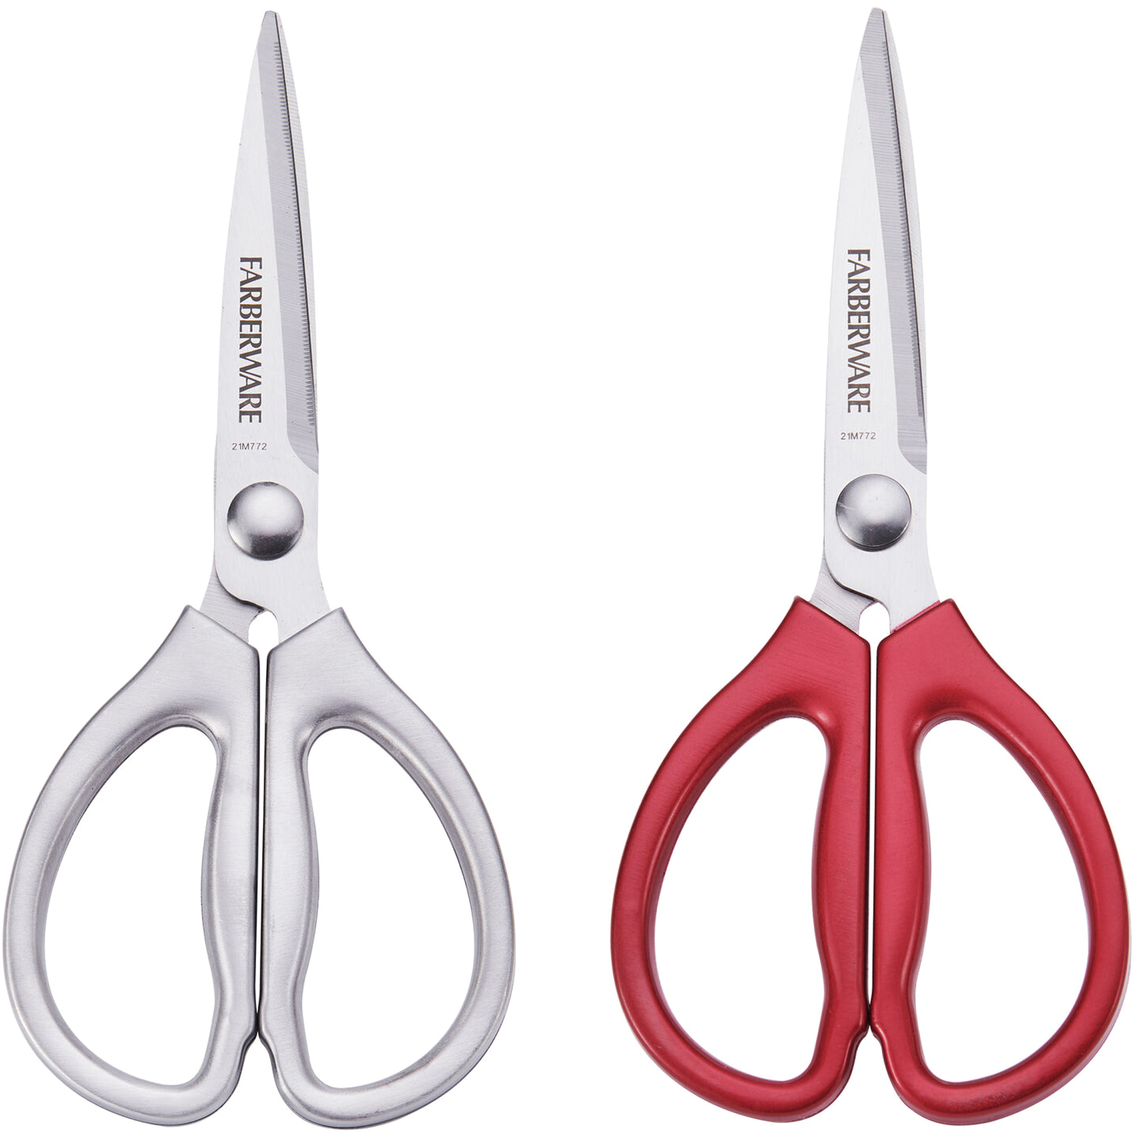 Farberware 2 Pc. Stamped Stainless Steel Shears Set